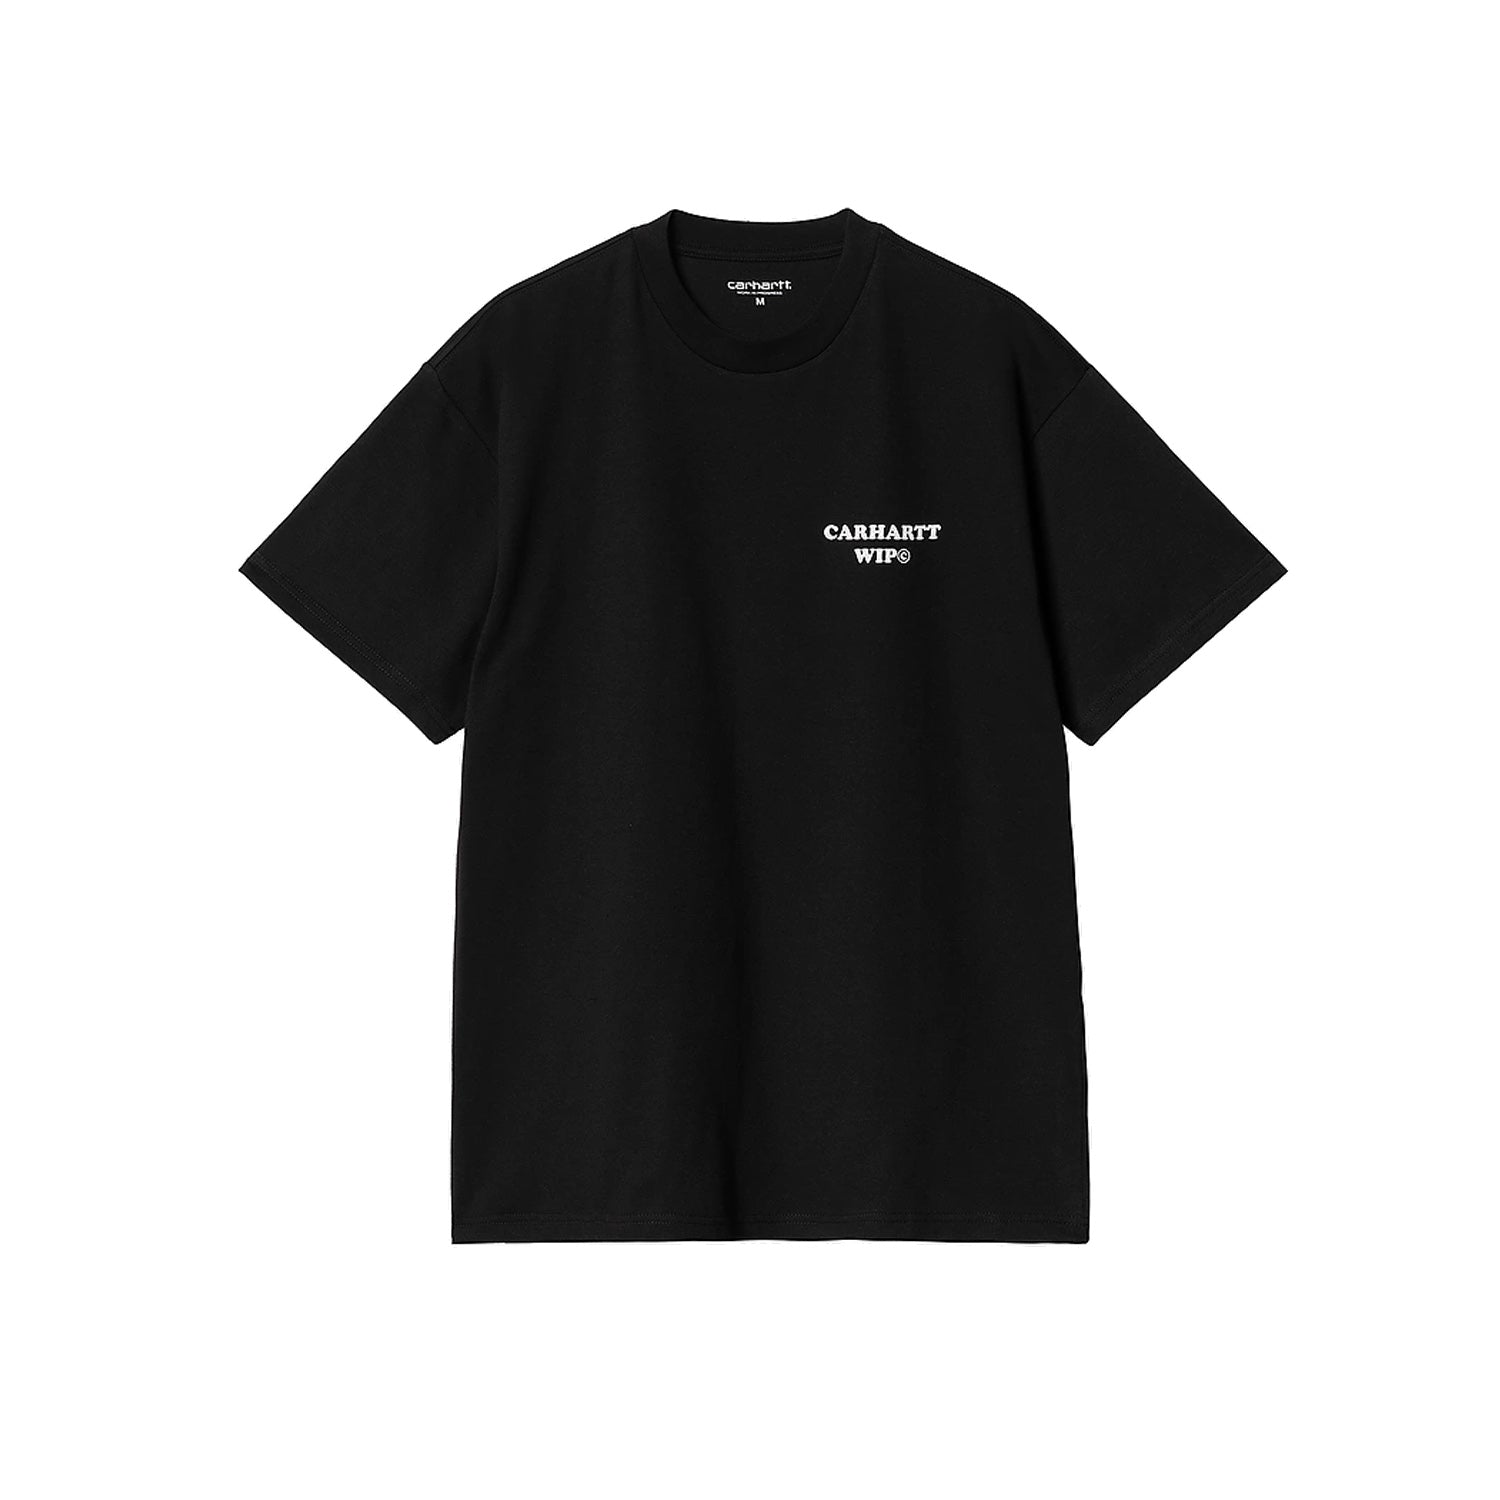 S/S Isis Maria Dinner T-Shirt